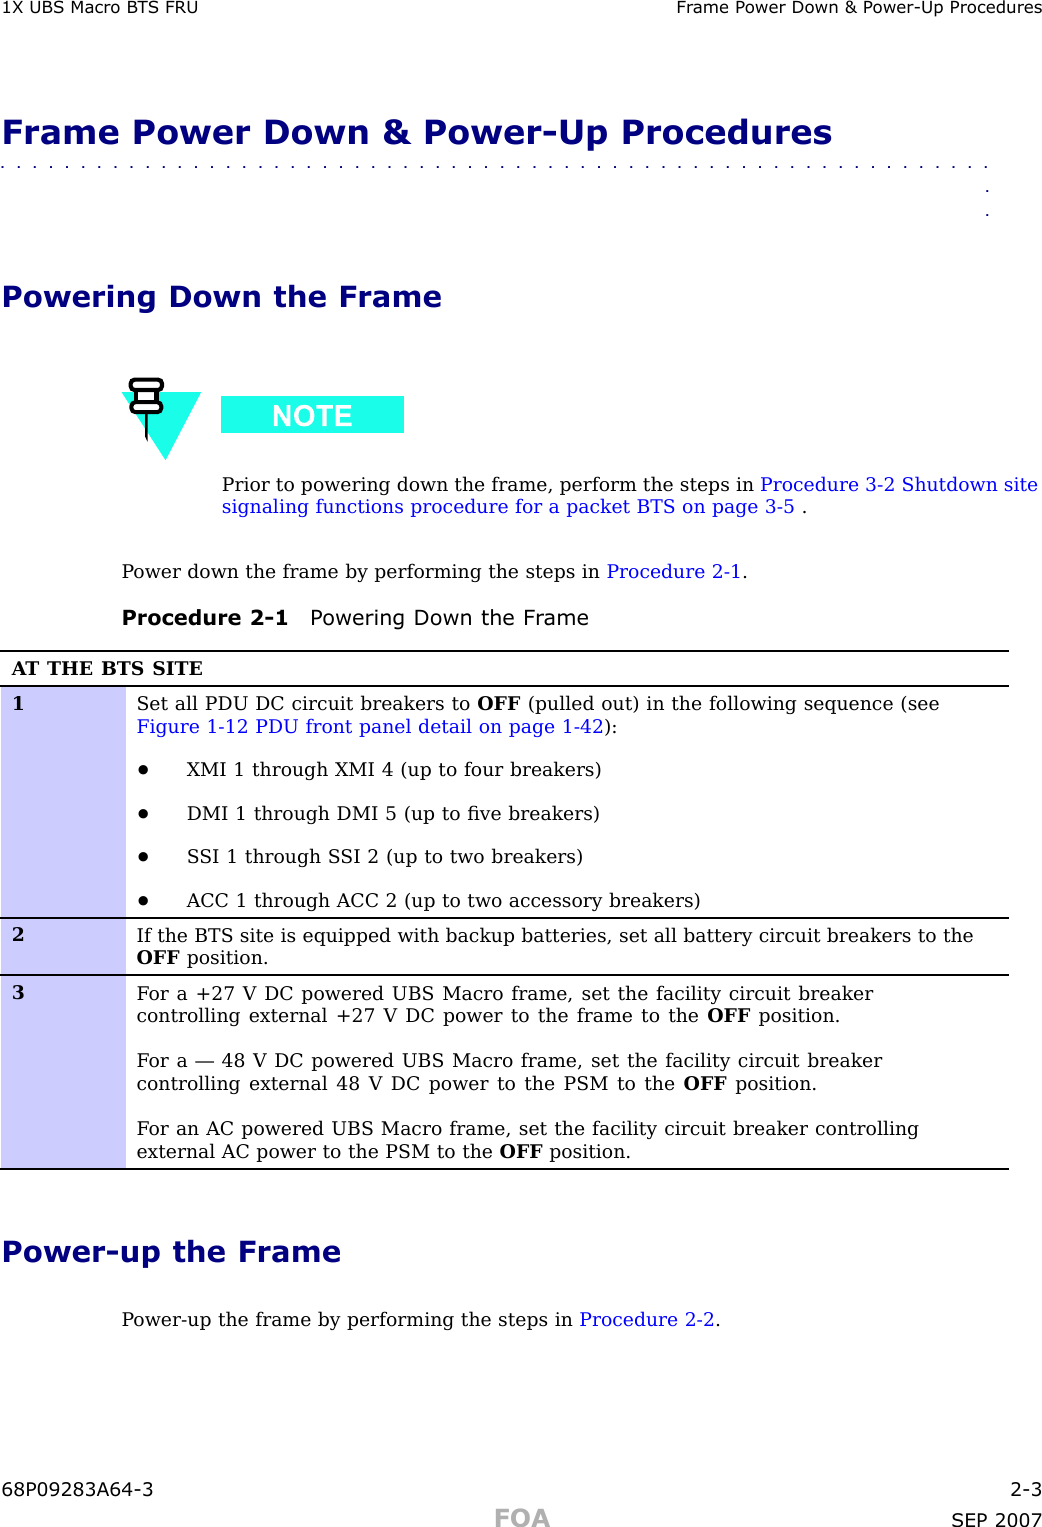 1X UBS Macro B T S FRU Fr ame P ower Down &amp; P ower -Up ProceduresFrame Power Down &amp; Power -Up Procedures■■■■■■■■■■■■■■■■■■■■■■■■■■■■■■■■■■■■■■■■■■■■■■■■■■■■■■■■■■■■■■■■Powering Down the FramePrior to powering down the frame, perform the steps in Procedure 3 -2 Shutdown sitesignaling functions procedure for a packet BTS on page 3 - 5 .P ower down the frame by performing the steps in Procedure 2 -1 .Procedure 2 -1 P owering Down the Fr ameA T THE BTS SITE1Set all PDU DC circuit breakers to OFF (pulled out) in the following sequence (seeFigure 1-12 PDU front panel detail on page 1- 42 ):•XMI 1 through XMI 4 (up to four breakers)•DMI 1 through DMI 5 (up to ﬁve breakers)•S SI 1 through S SI 2 (up to two breakers)•ACC 1 through ACC 2 (up to two accessory breakers)2If the BTS site is equipped with backup batteries, set all battery circuit breakers to theOFF position.3F or a +27 V DC powered UBS Macro frame, set the facility circuit breakercontrolling external +27 V DC power to the frame to the OFF position.F or a — 48 V DC powered UBS Macro frame, set the facility circuit breakercontrolling external 48 V DC power to the PSM to the OFF position.F or an AC powered UBS Macro frame, set the facility circuit breaker controllingexternal AC power to the PSM to the OFF position.Power -up the FrameP ower -up the frame by performing the steps in Procedure 2 -2 .68P09283A64 -3 2 -3FOA SEP 2007